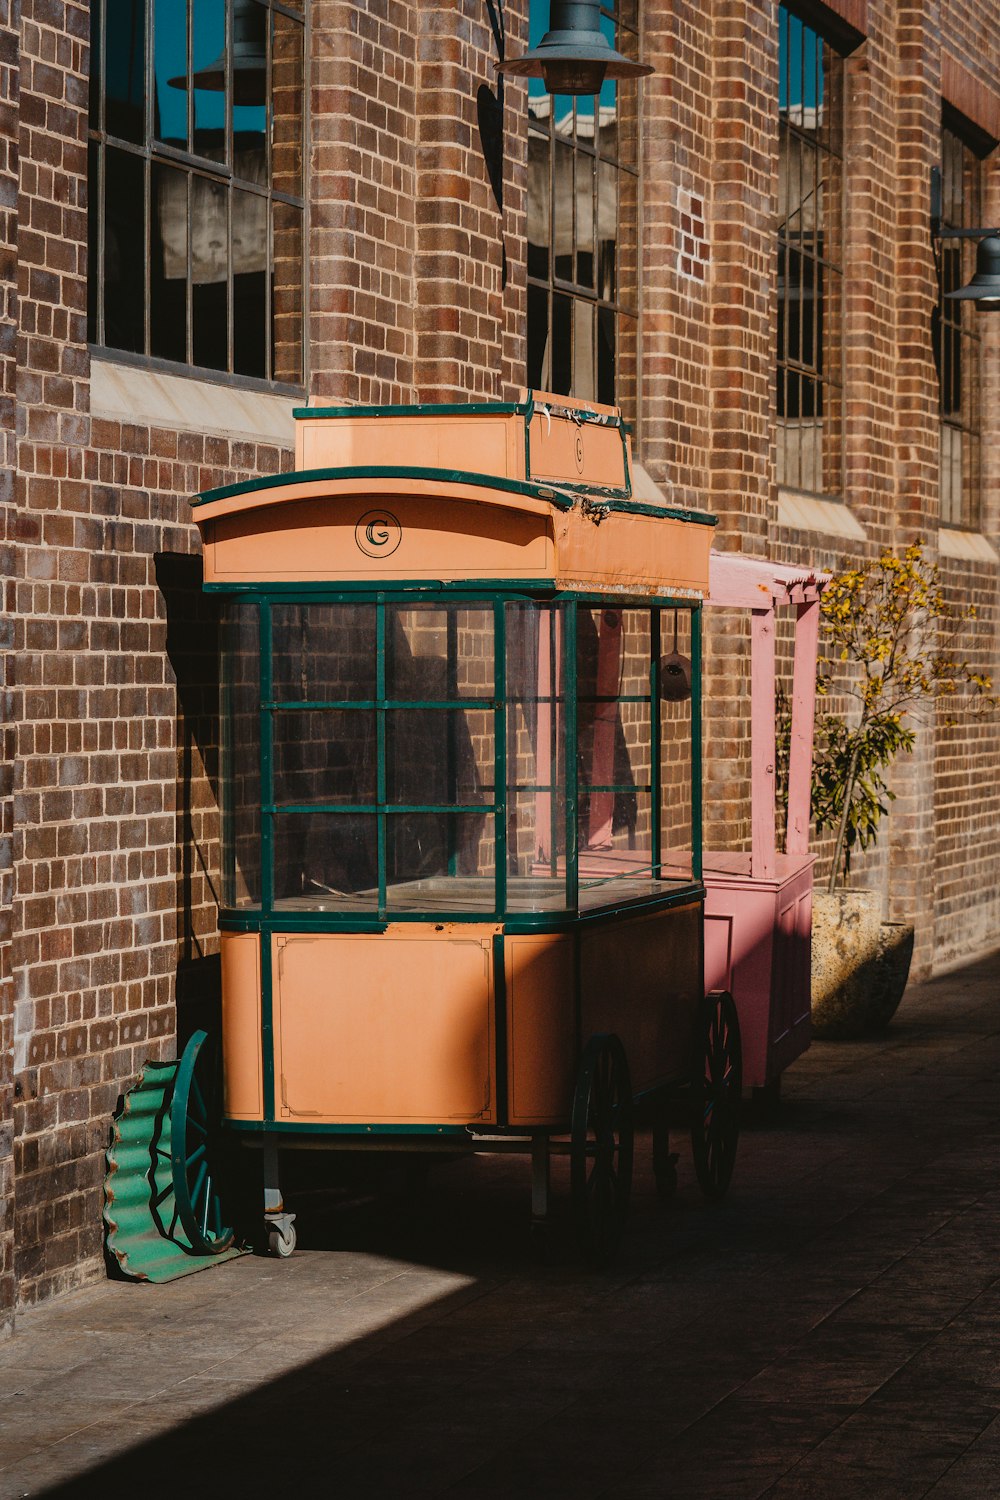 a trolley car parked next to a brick building